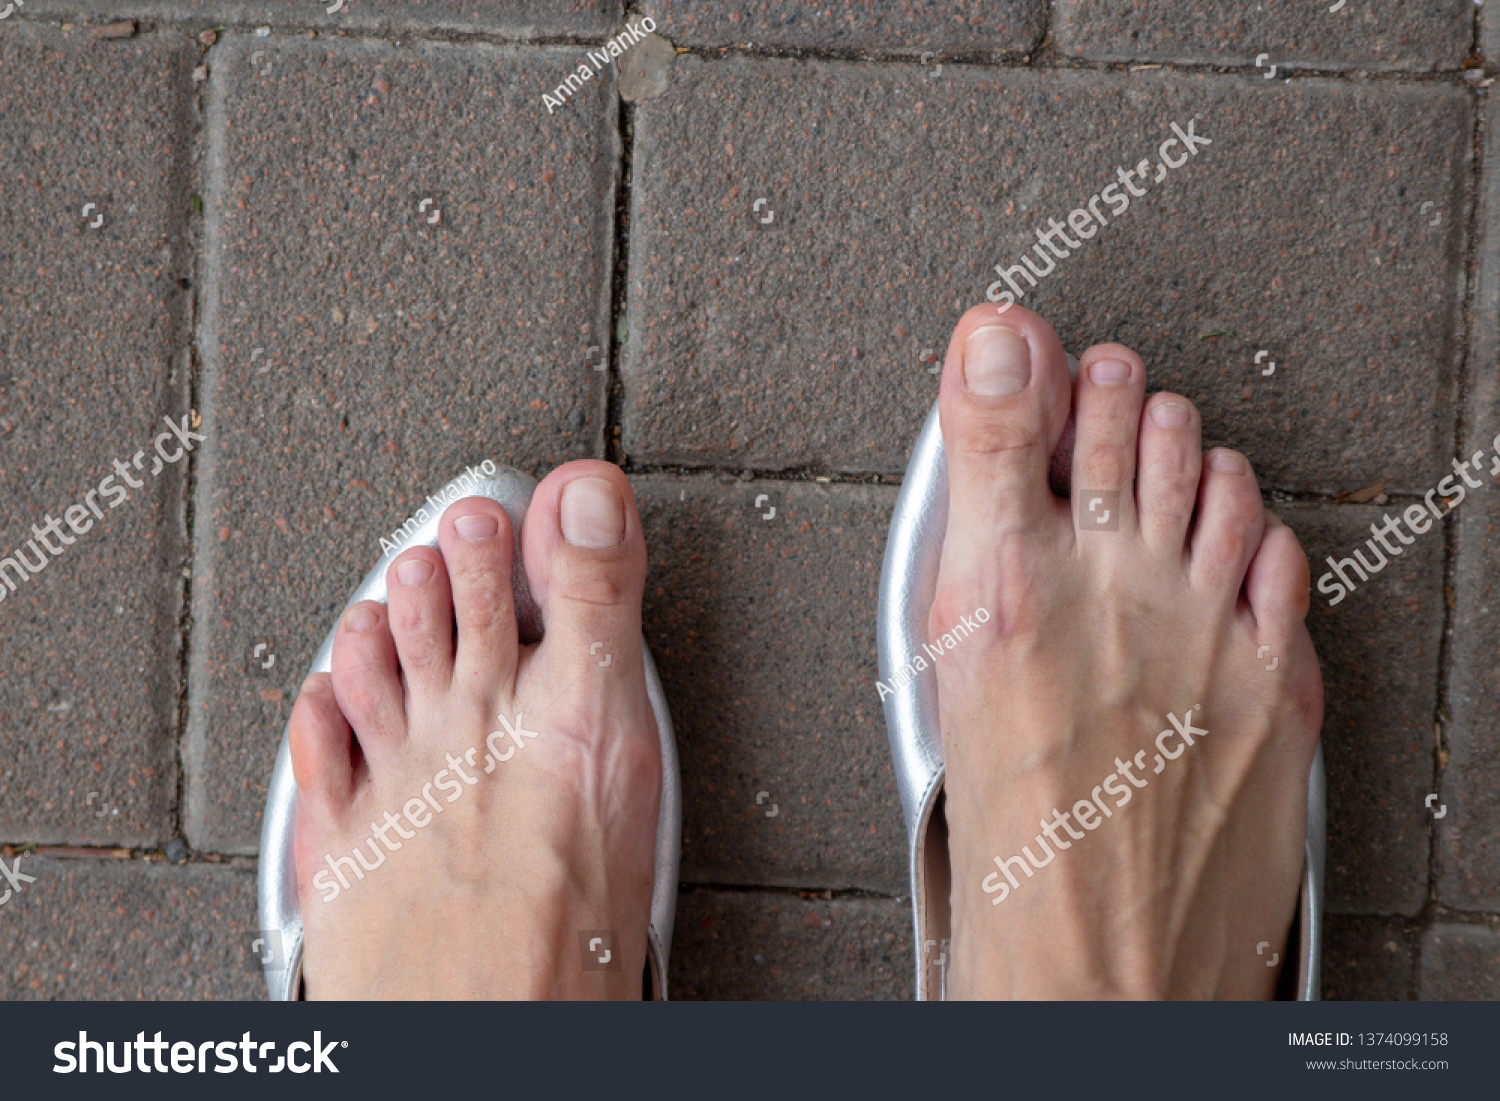 feet without shoes